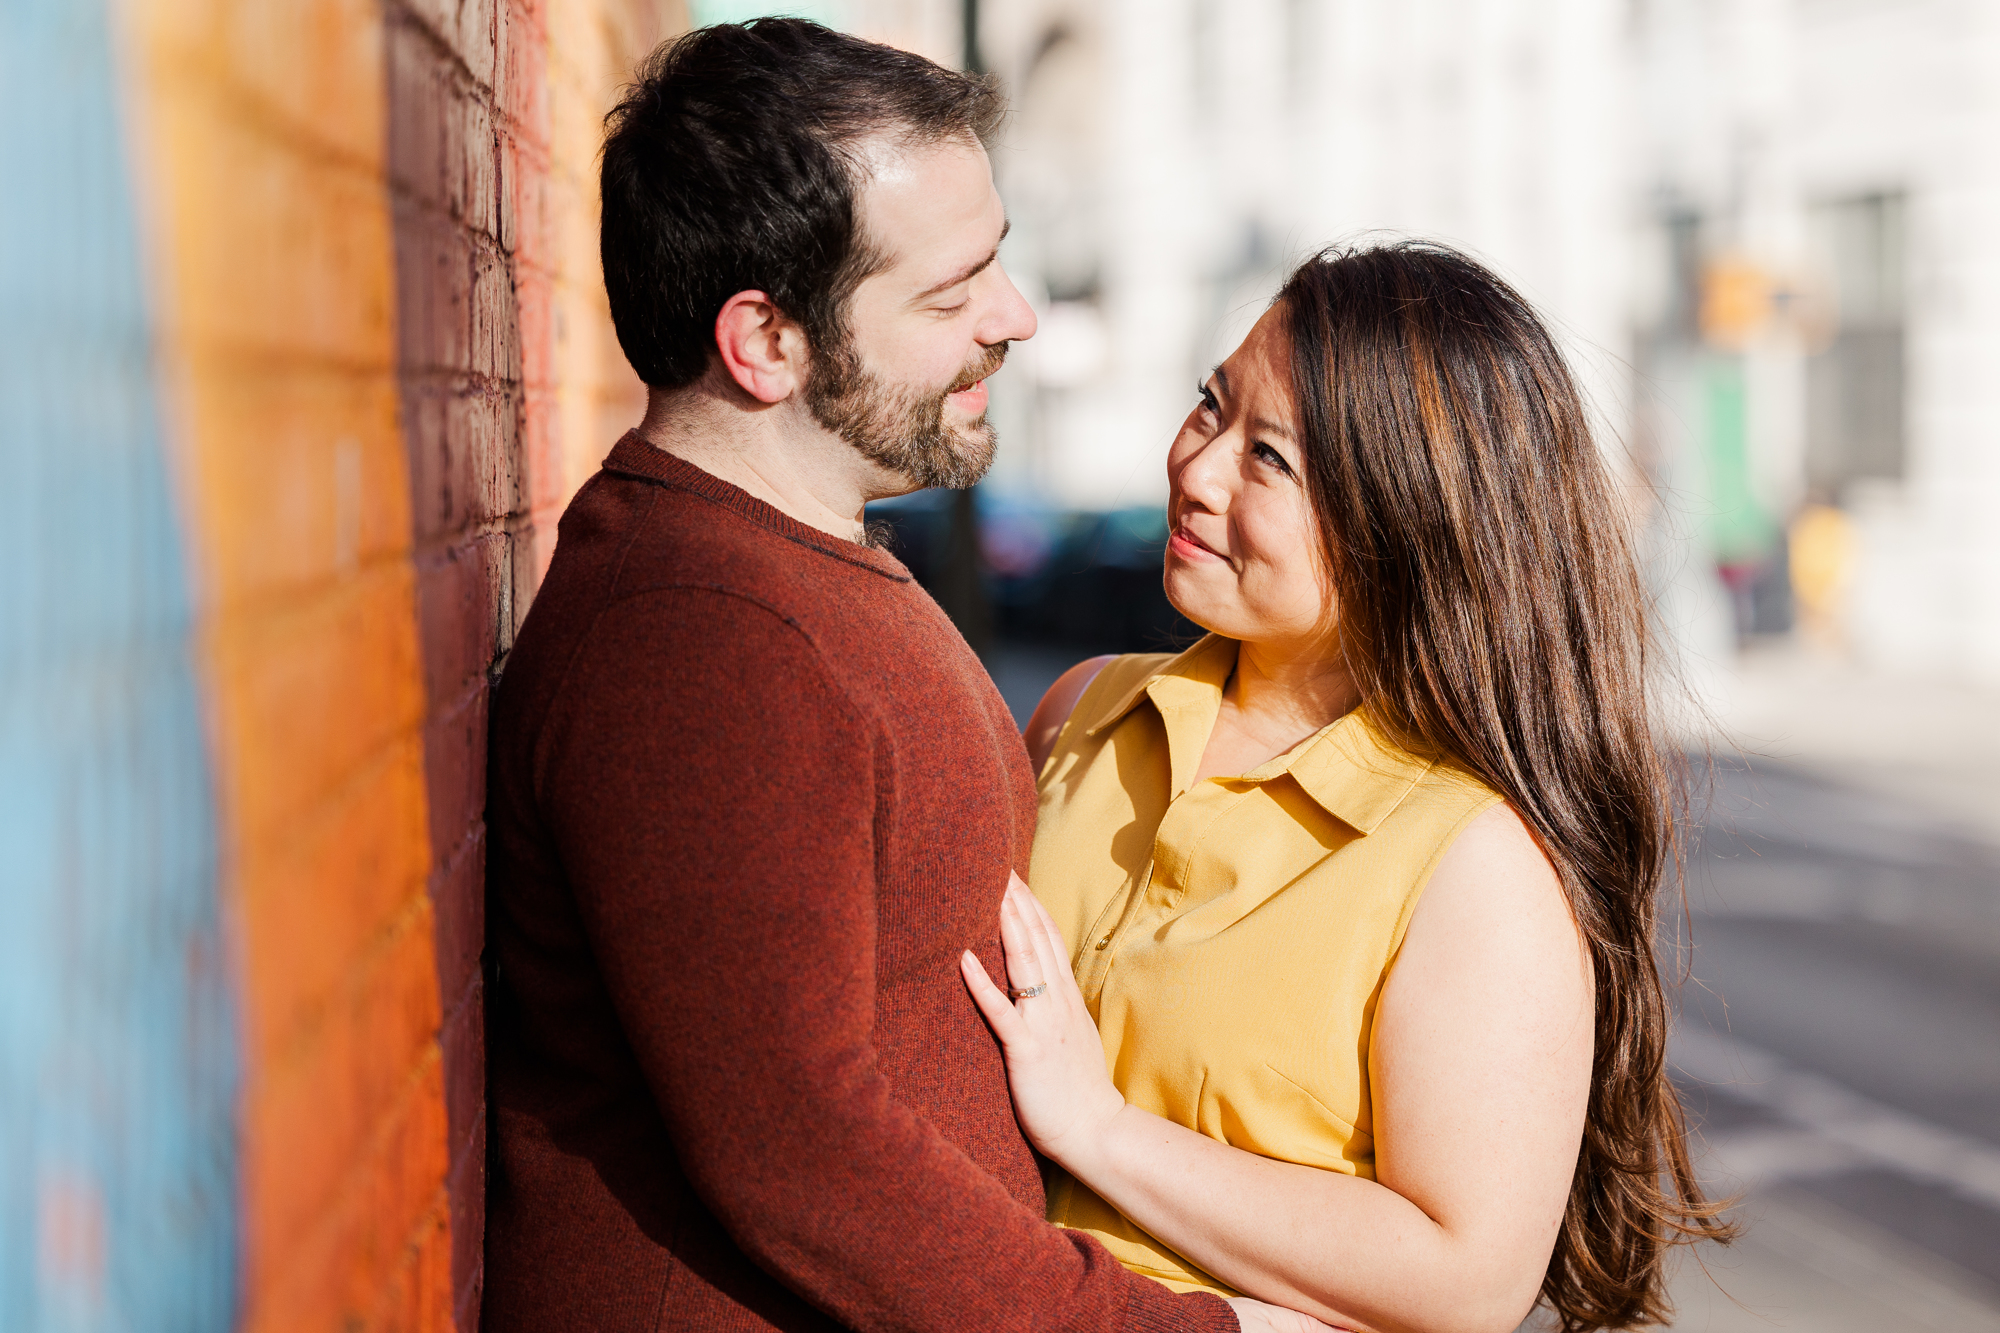 Glowing Brooklyn Bridge Engagement Photography with Matching Outfits